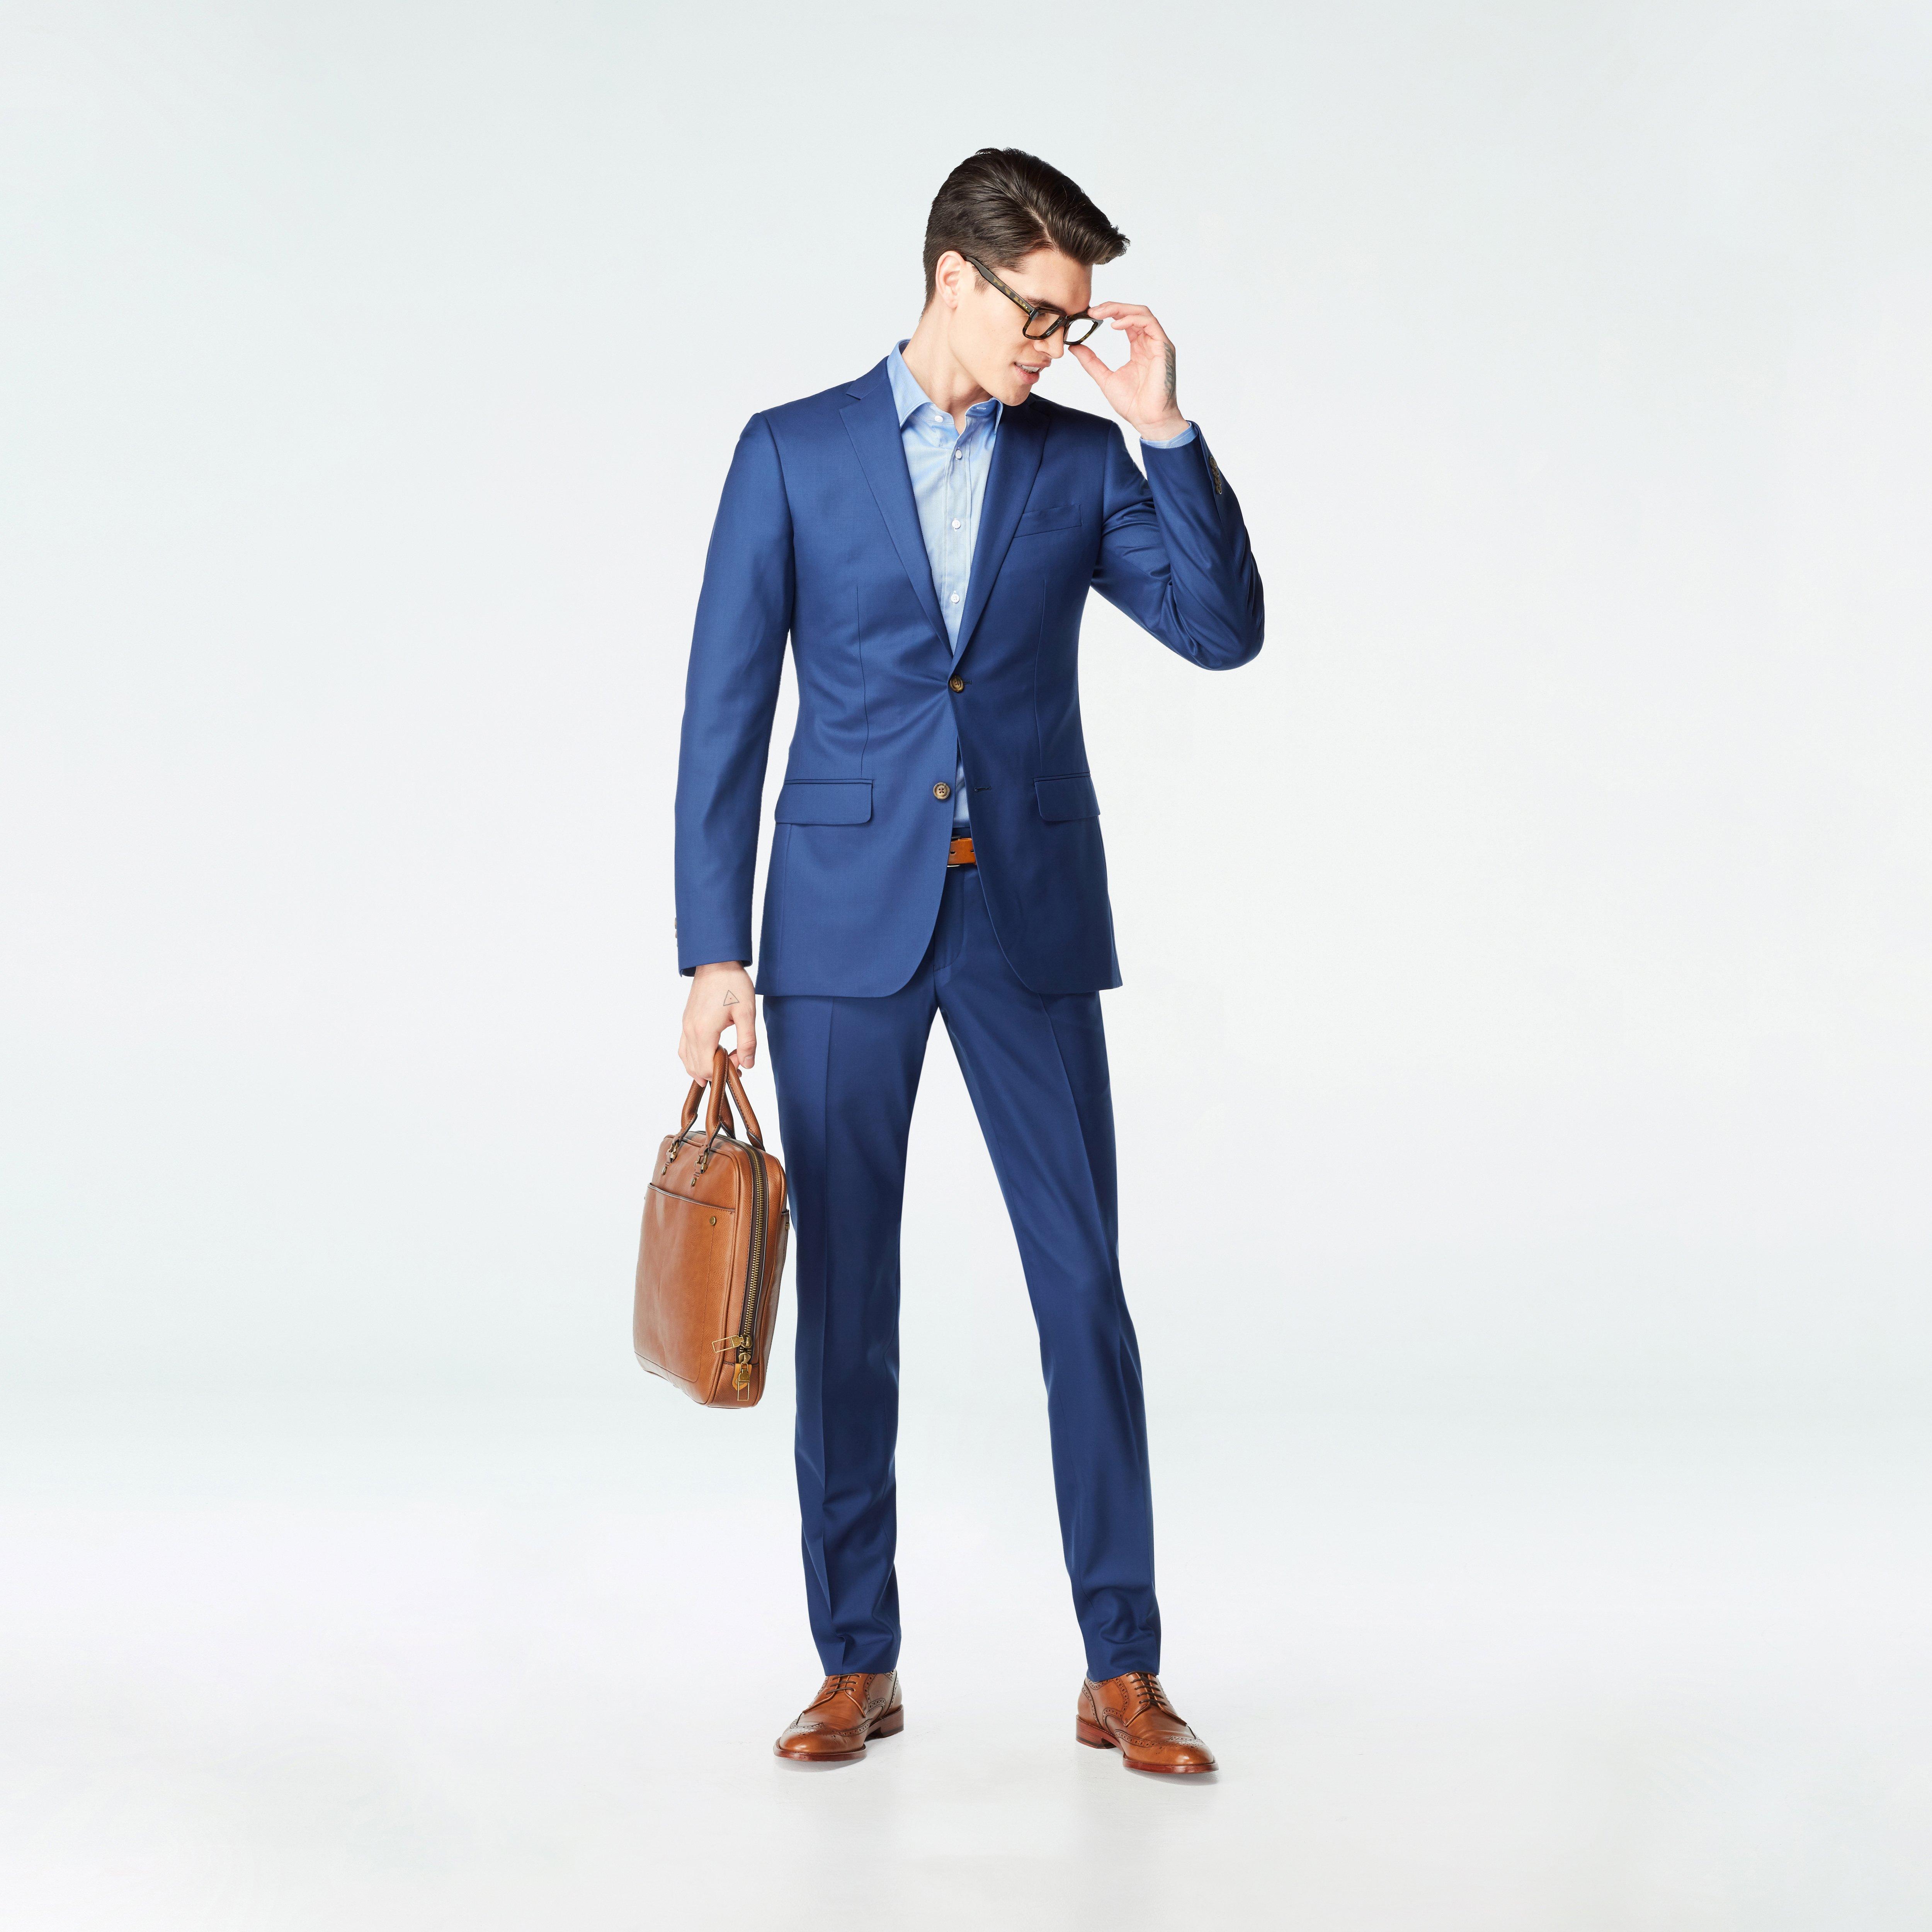 Indochino Best Sellers - Made to Measure Suits